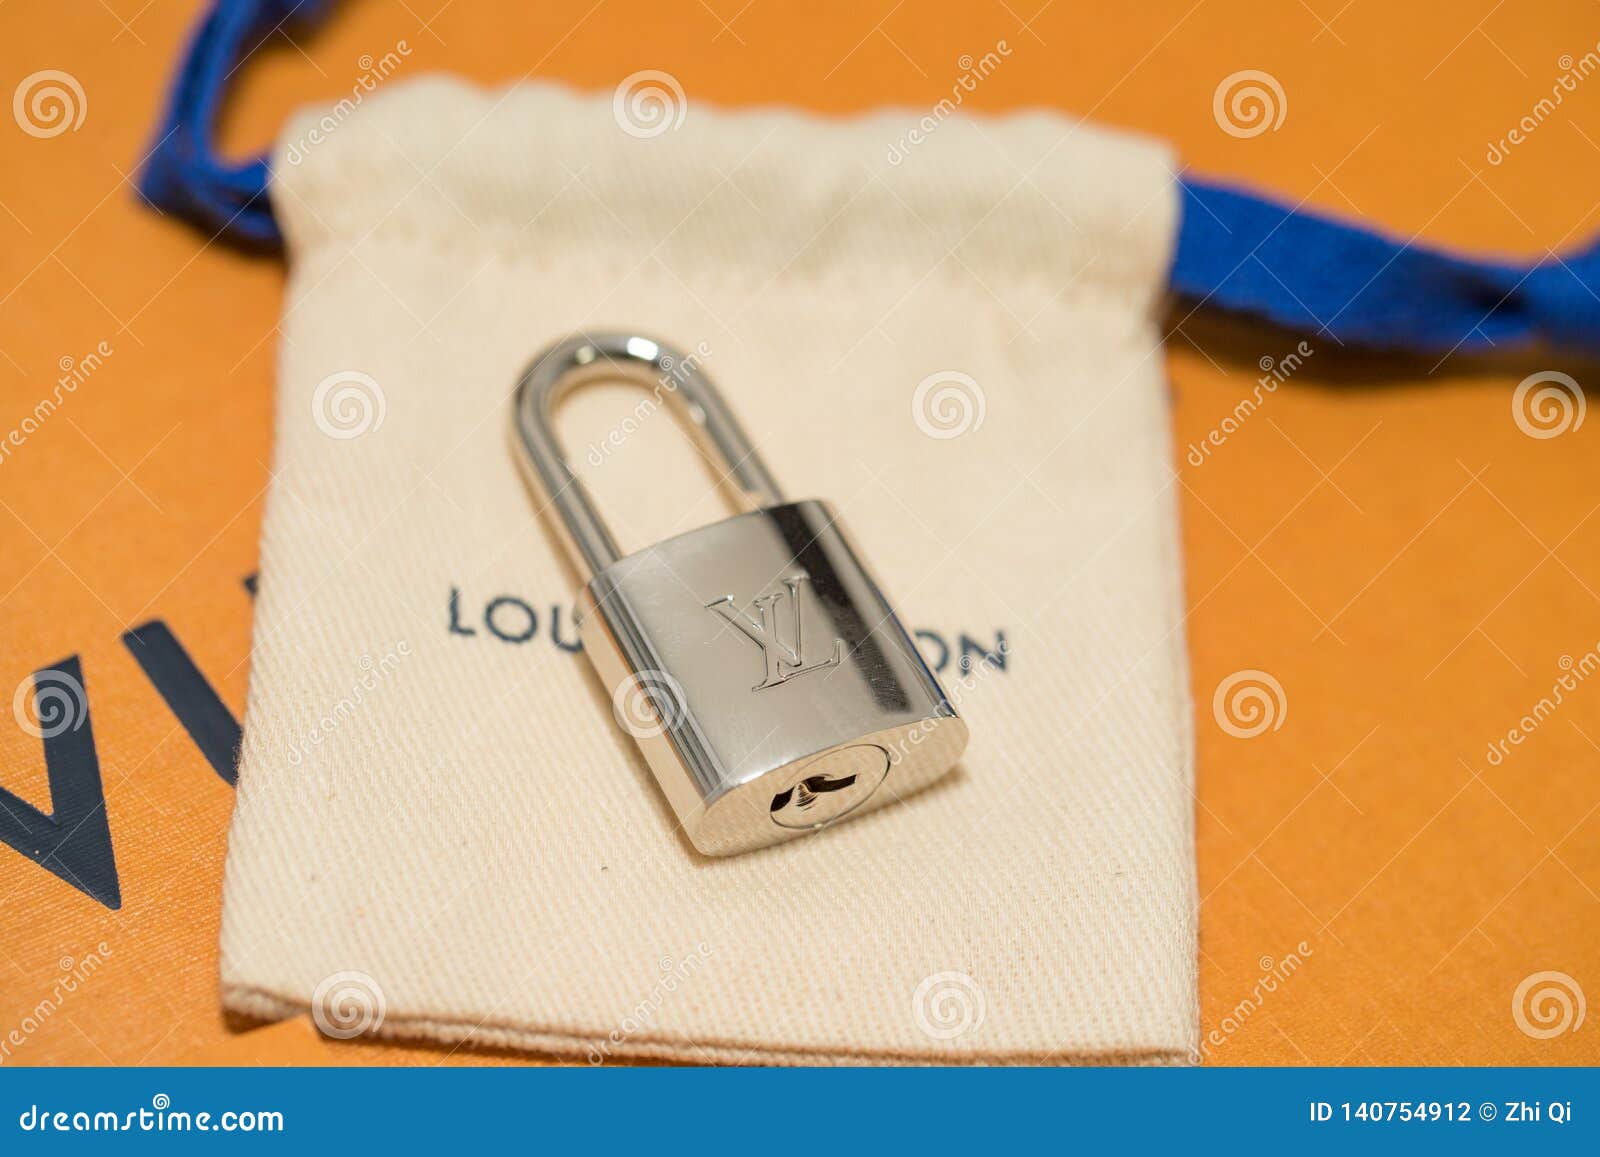 Louis Vuitton Lock on the Table. Editorial Photography - Image of